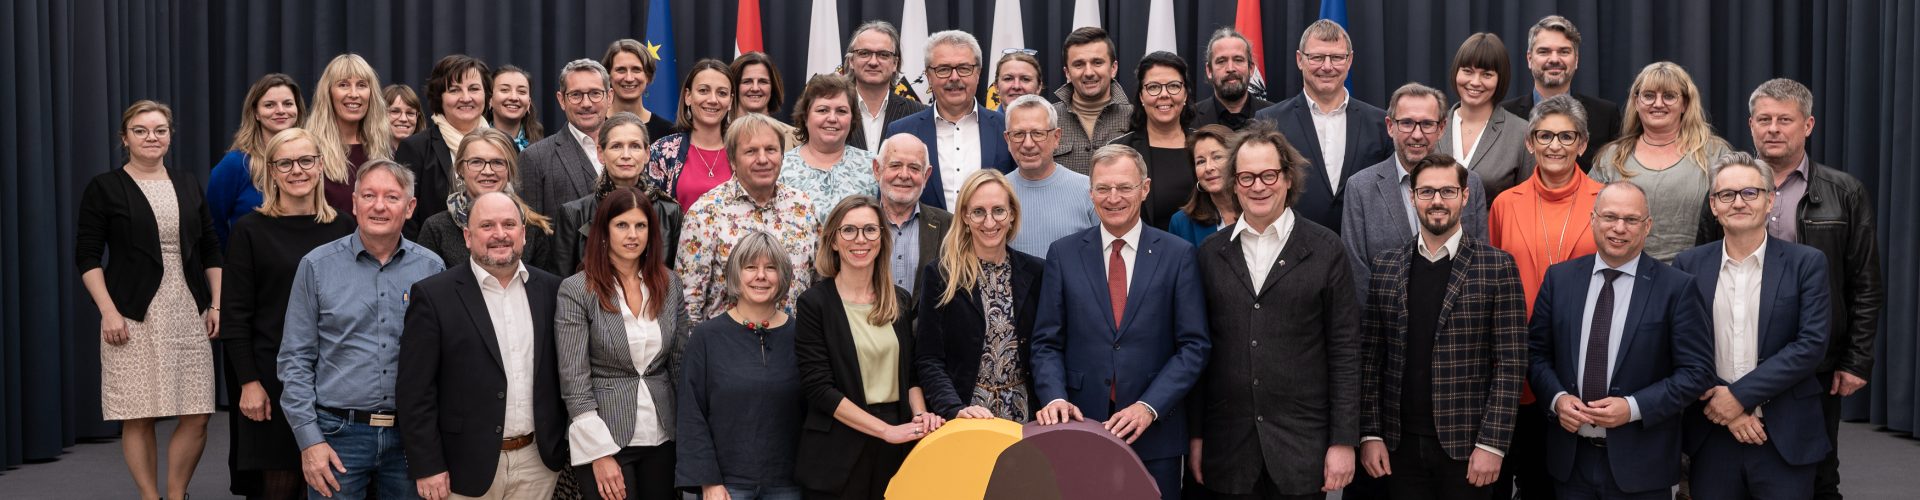 50 representatives of the 35 Anton Bruckner communities and project participants took part in the networking meeting of the first Upper Austrian KulturEXPO. Photo: Province of Upper Austria/Peter Mayr